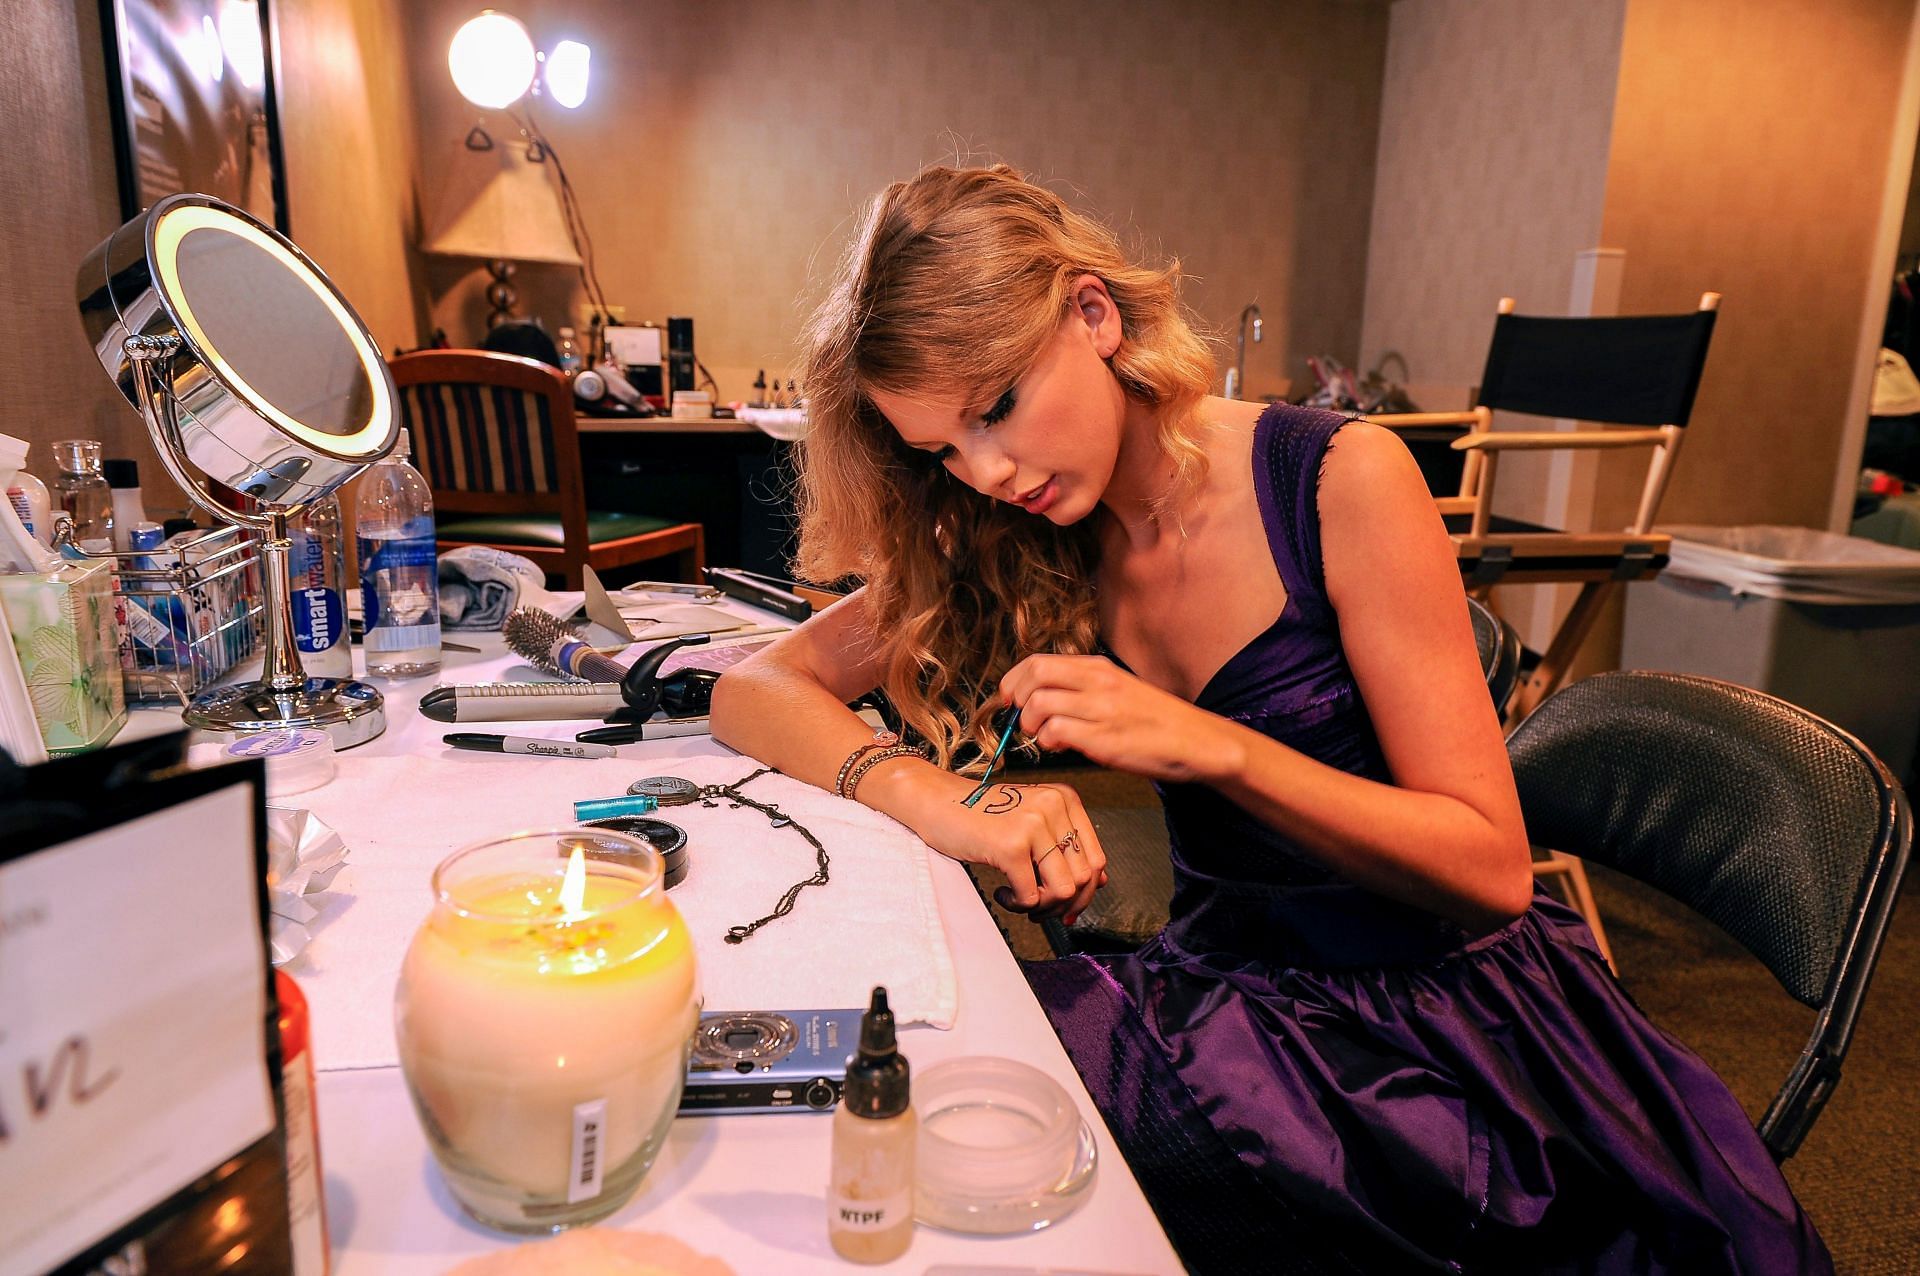 Taylor Swift&#039;s Fearless Tour 2009 In New York City (Photo by Larry Busacca/Getty Images for Erickson Public)